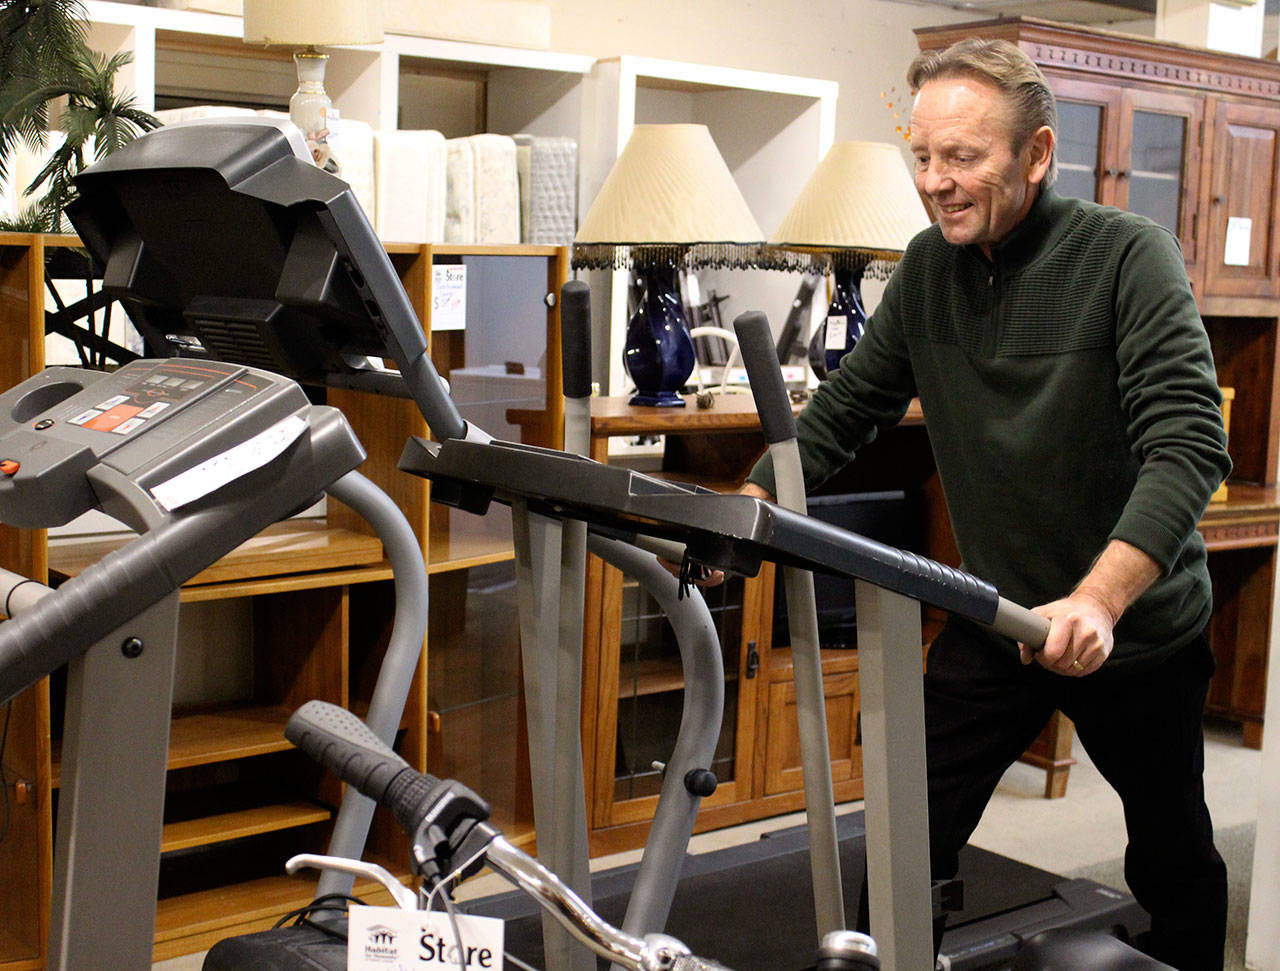 Tony Persson, who oversees both Habitat for Humanity stores, demonstrates that home exercise equipment is sometimes donated and put up for sale. He tries out a treadmill at the Oak Harbor location. (Photo by Patricia Guthrie/Whidbey News Group)